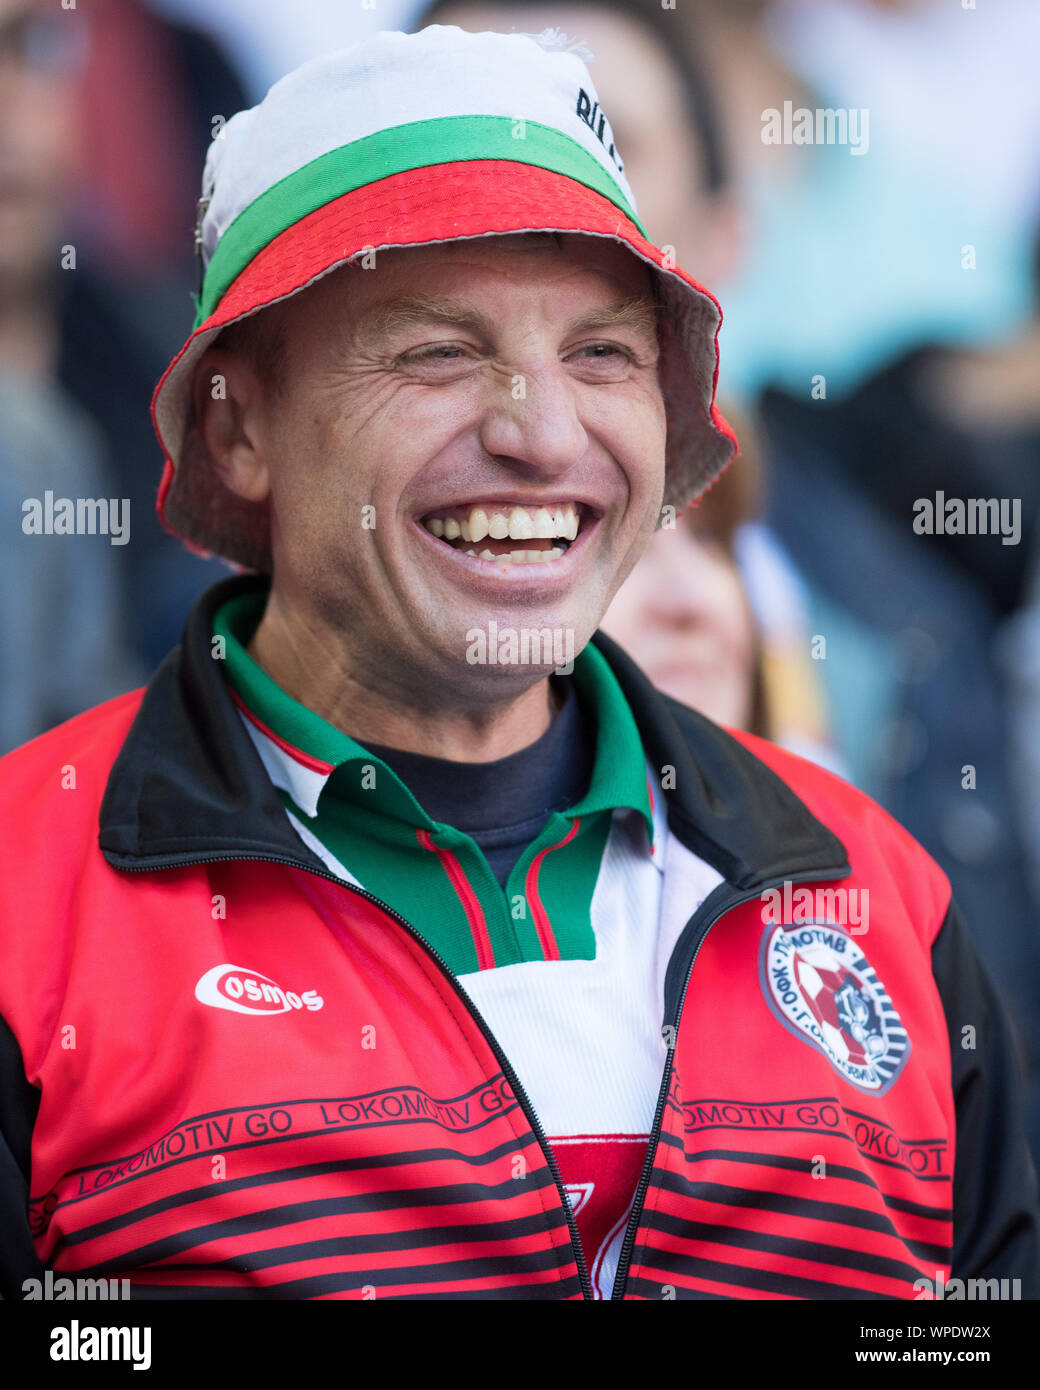 LONDON, ENGLAND - SEPTEMBER 07: Bulgaria fan during the UEFA Euro 2020 qualifier match between England and Bulgaria at Wembley Stadium on September 7, 2019 in London, England. (Photo by Sebastian Frej/MB Media) Stock Photo